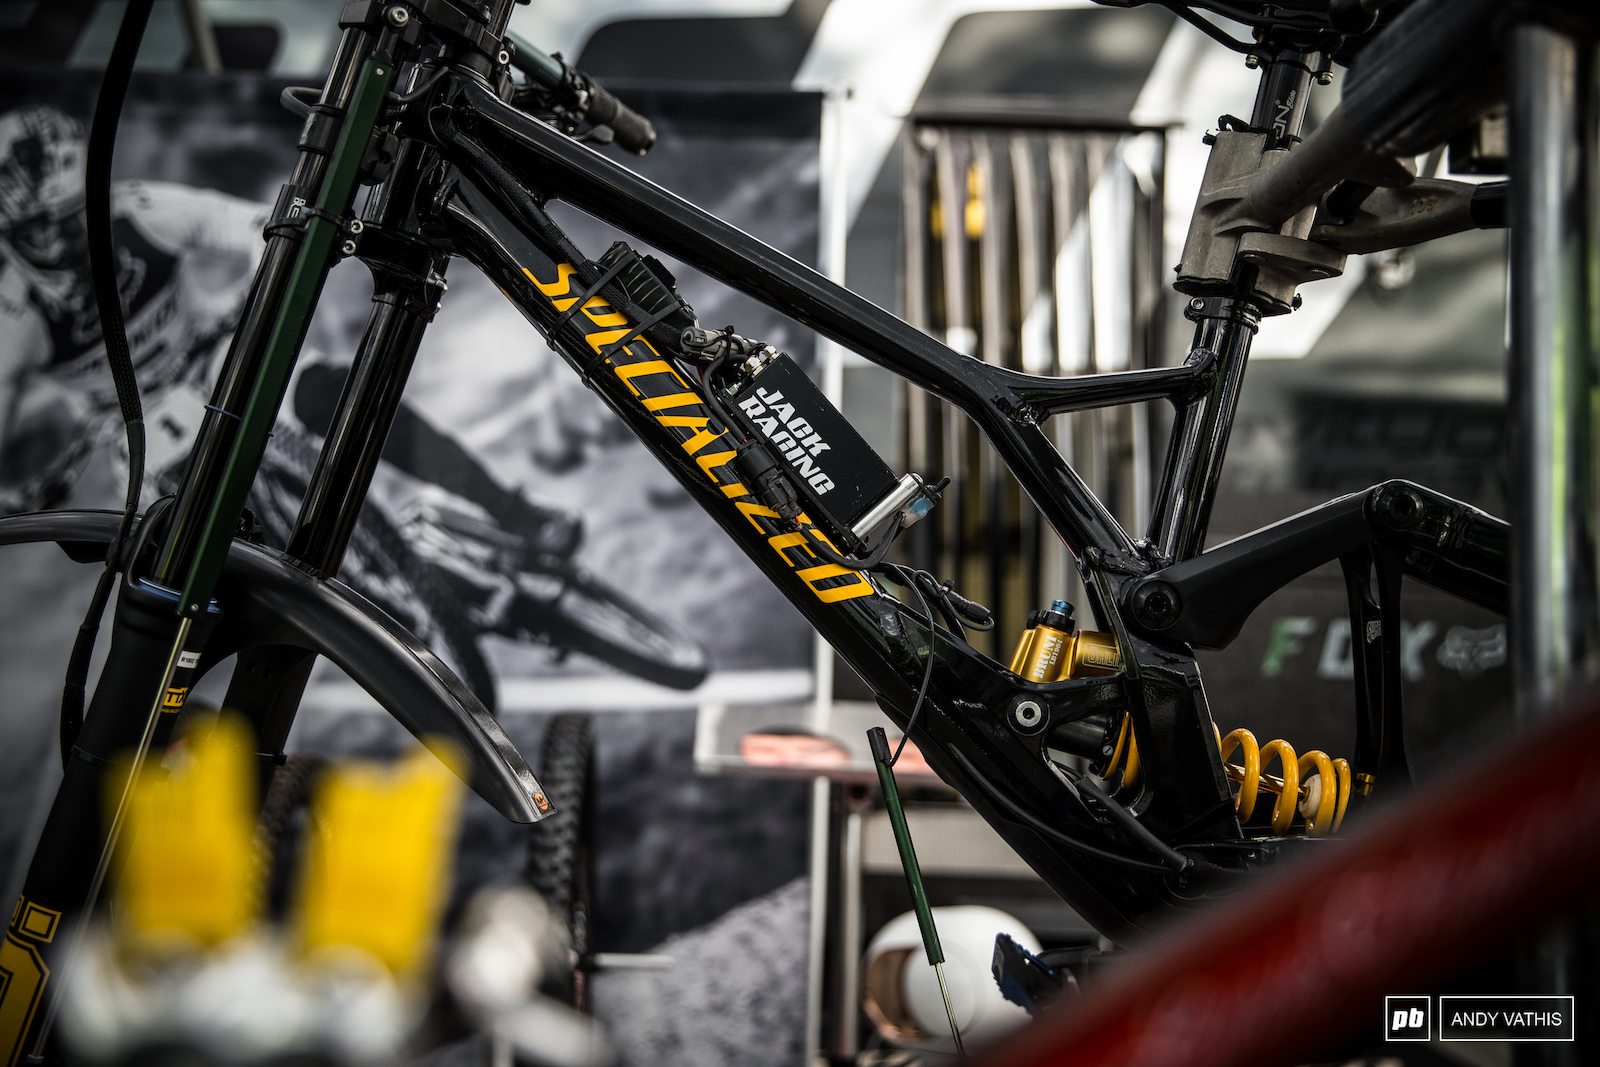 Specialized's test bikes fitted with data acquiring wizardry.